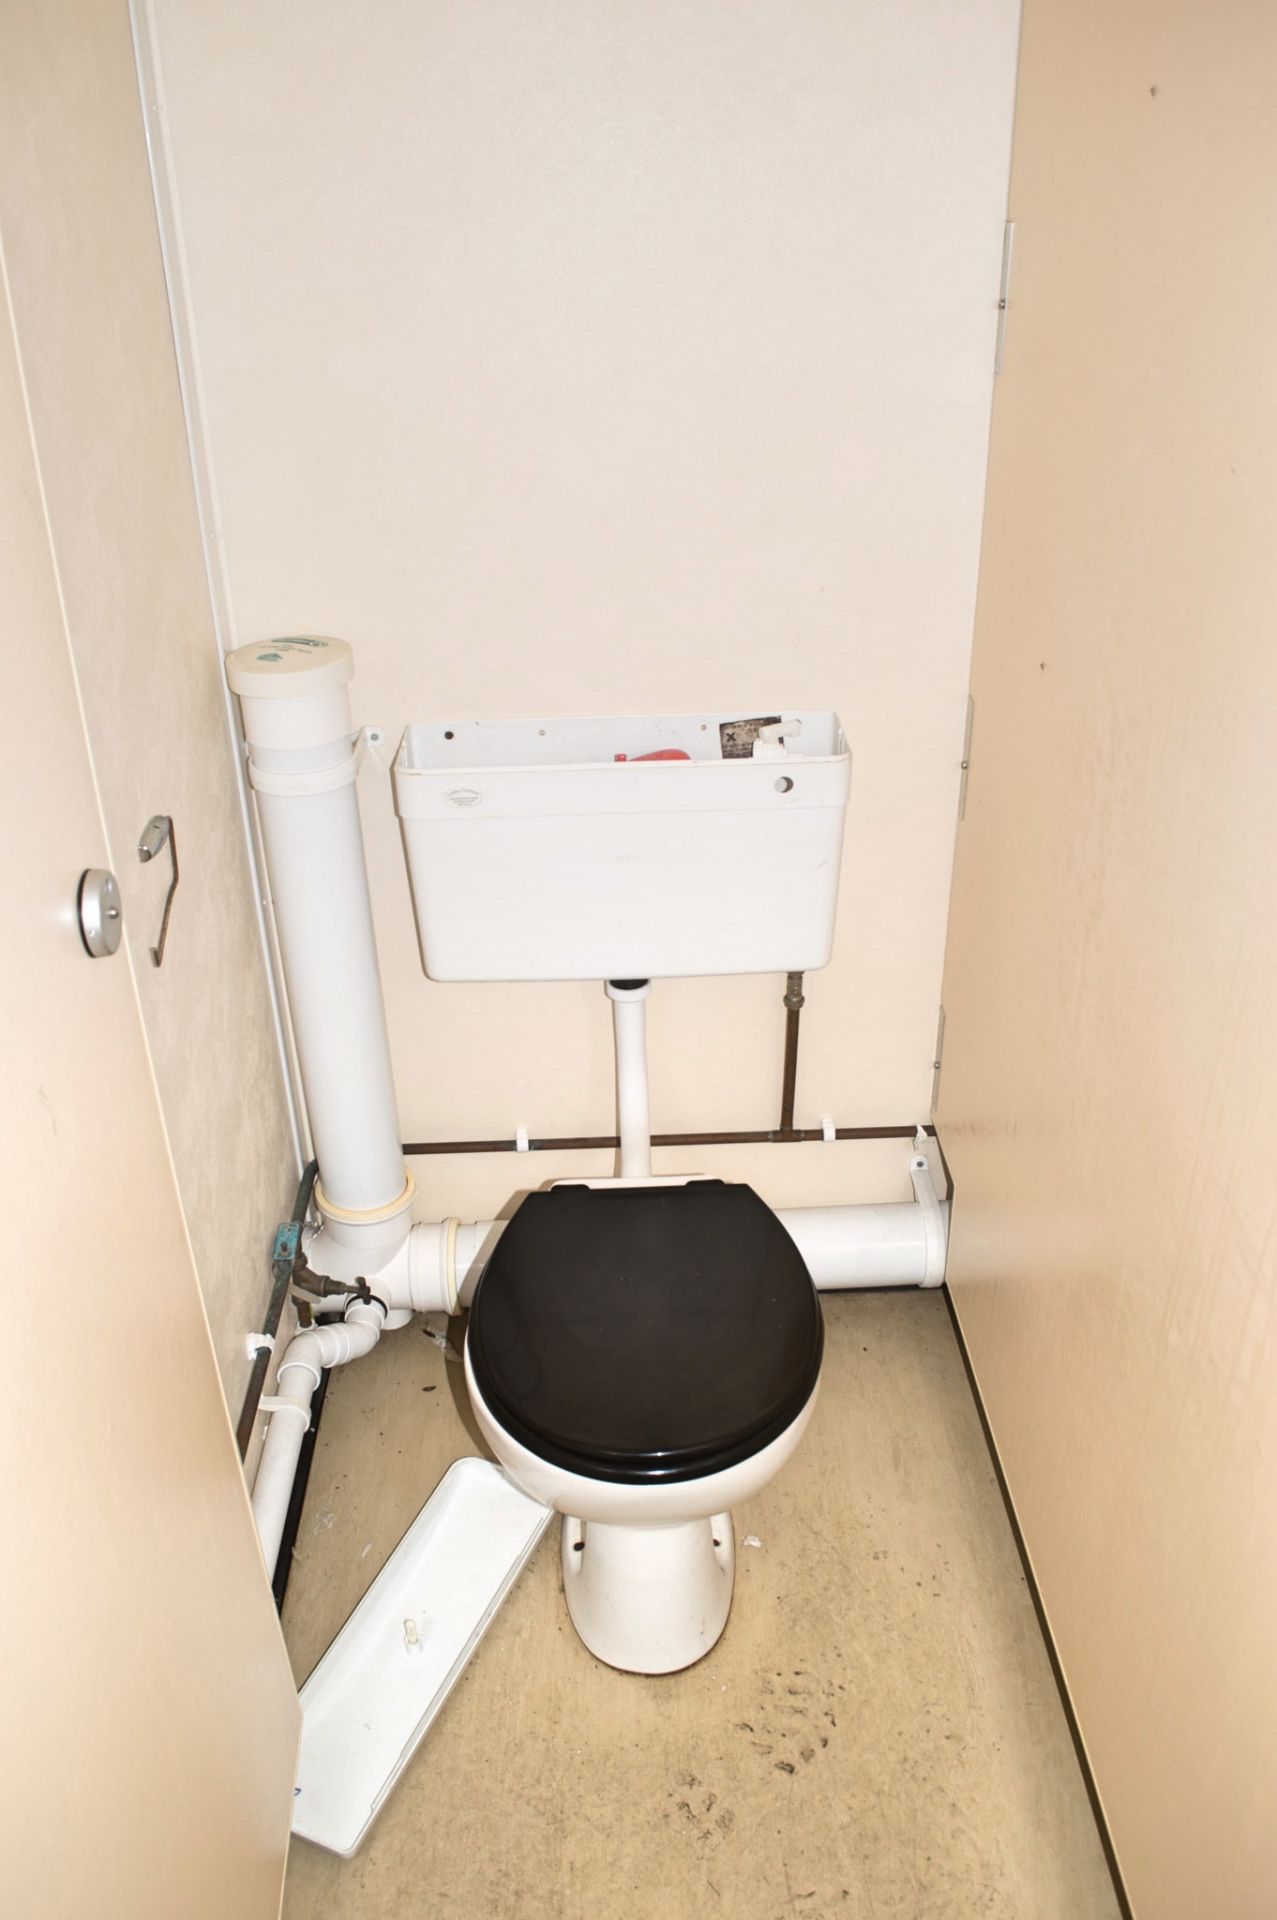 32 ft x 10 ft steel toilet site unit Comprising of: Gents toilet with; 4 - toilets, 4 - urinals & - Image 15 of 16